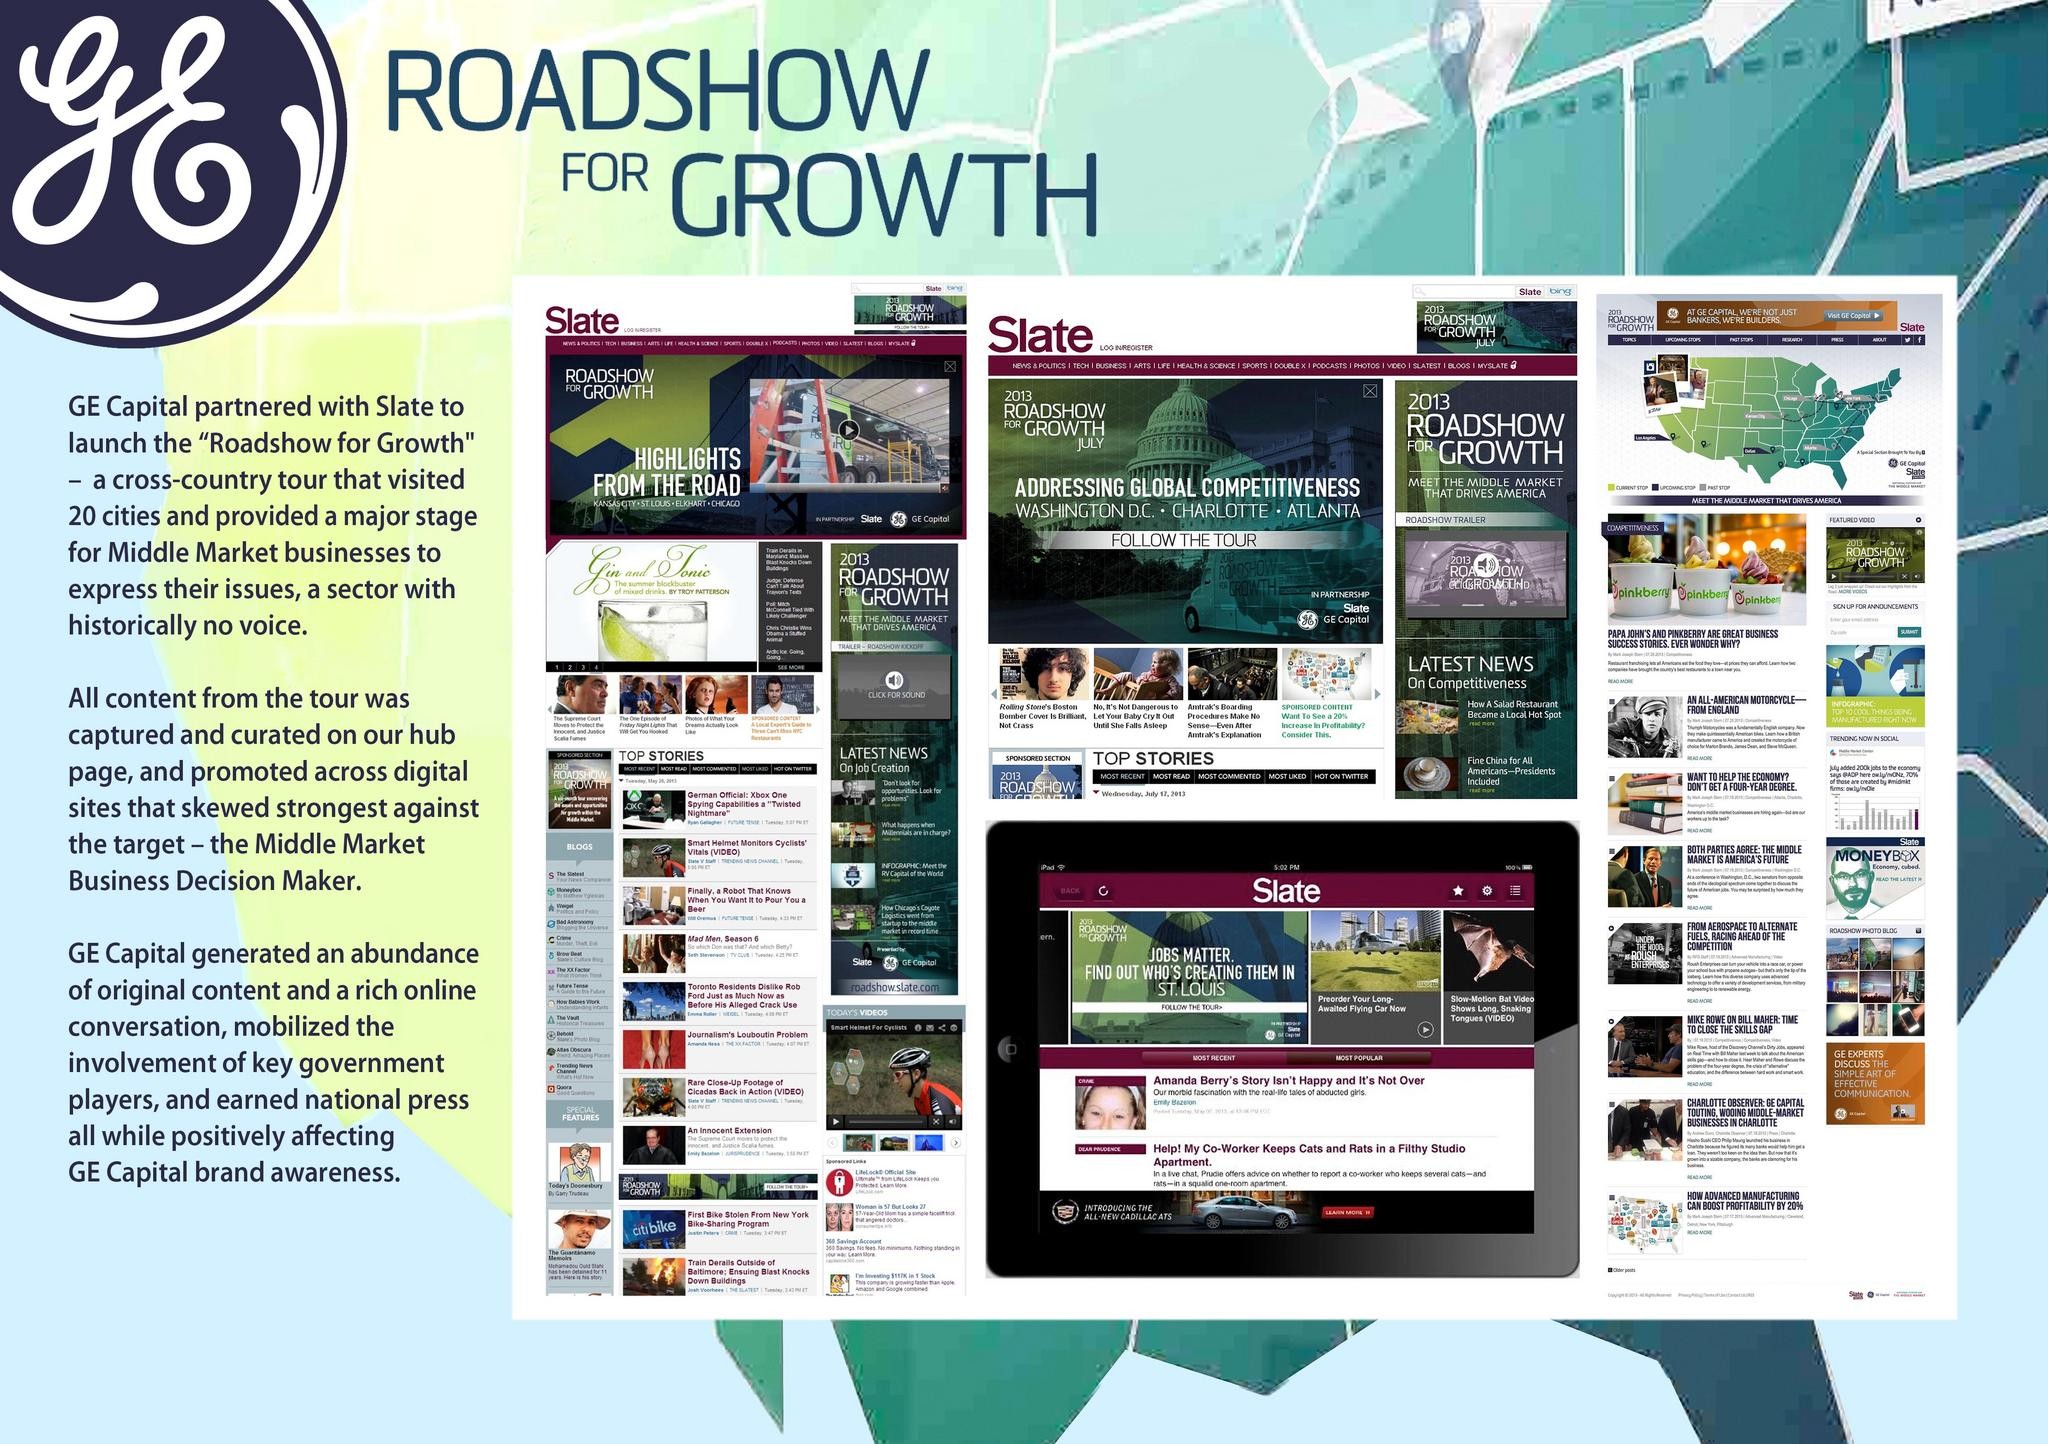 ROADSHOW FOR GROWTH